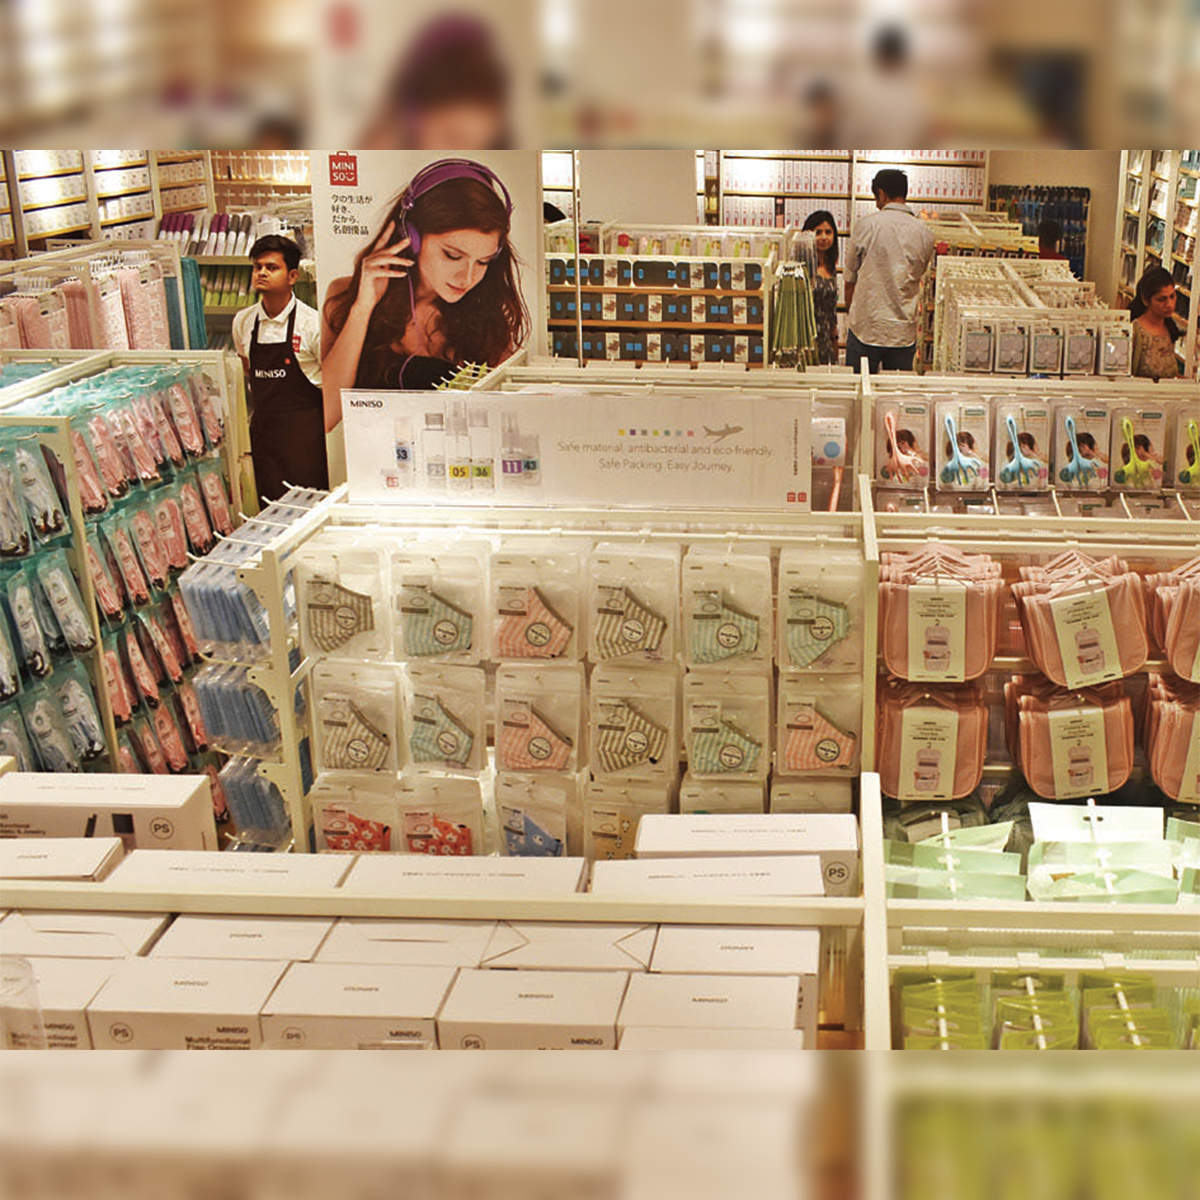 Miniso records sales at Rs 700cr for first year, experts sceptical